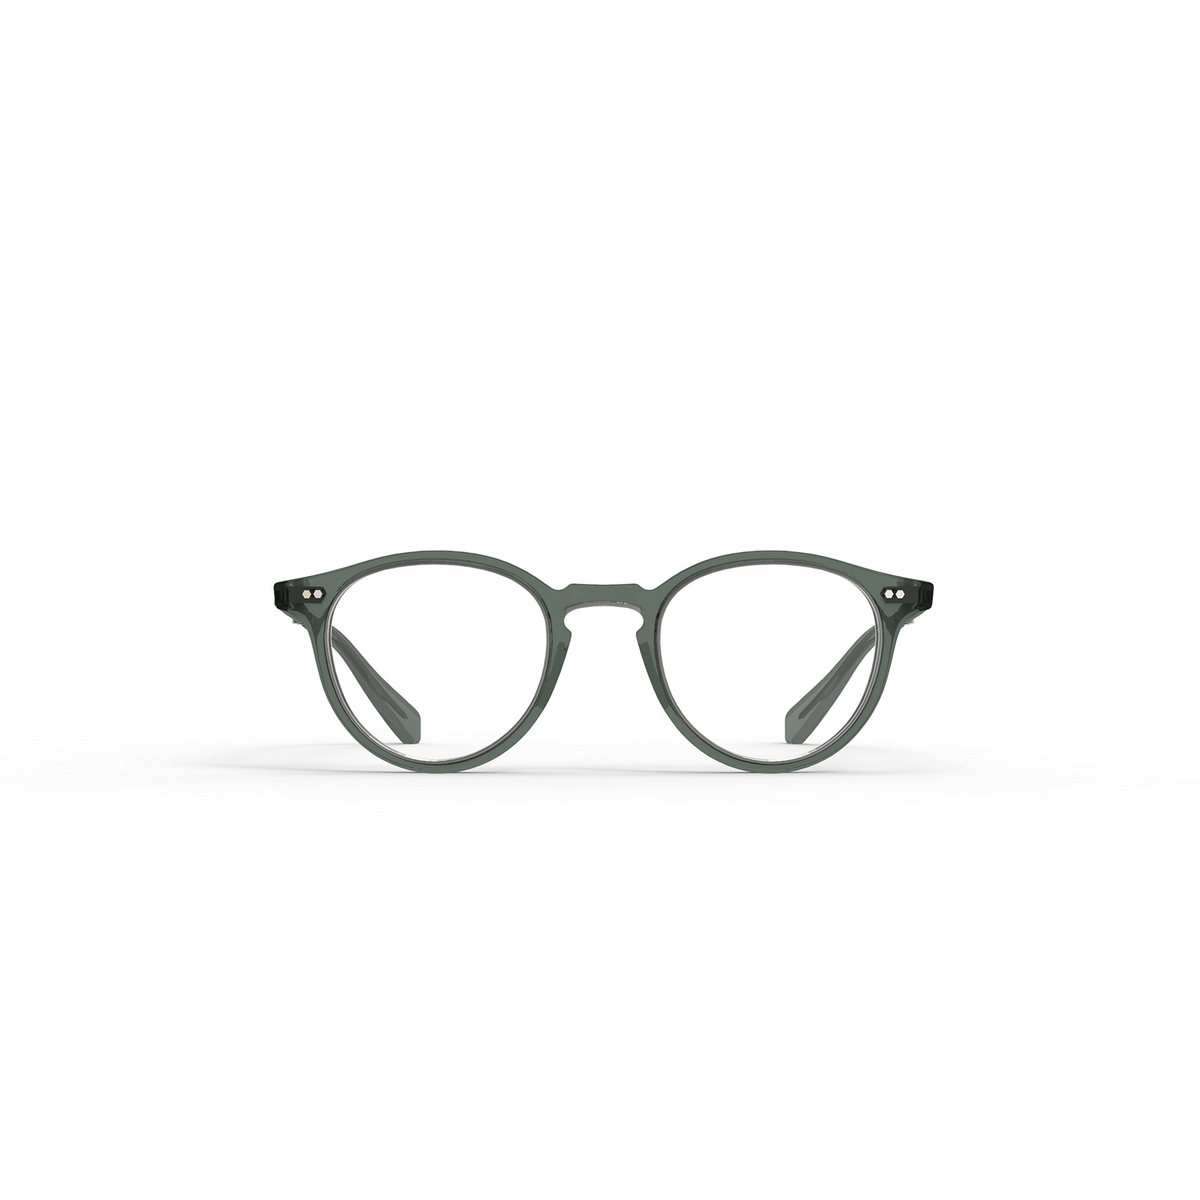 Mr. Leight MARMONT II C Eyeglasses GRYS-PW Grey Sage-Pewter - front view